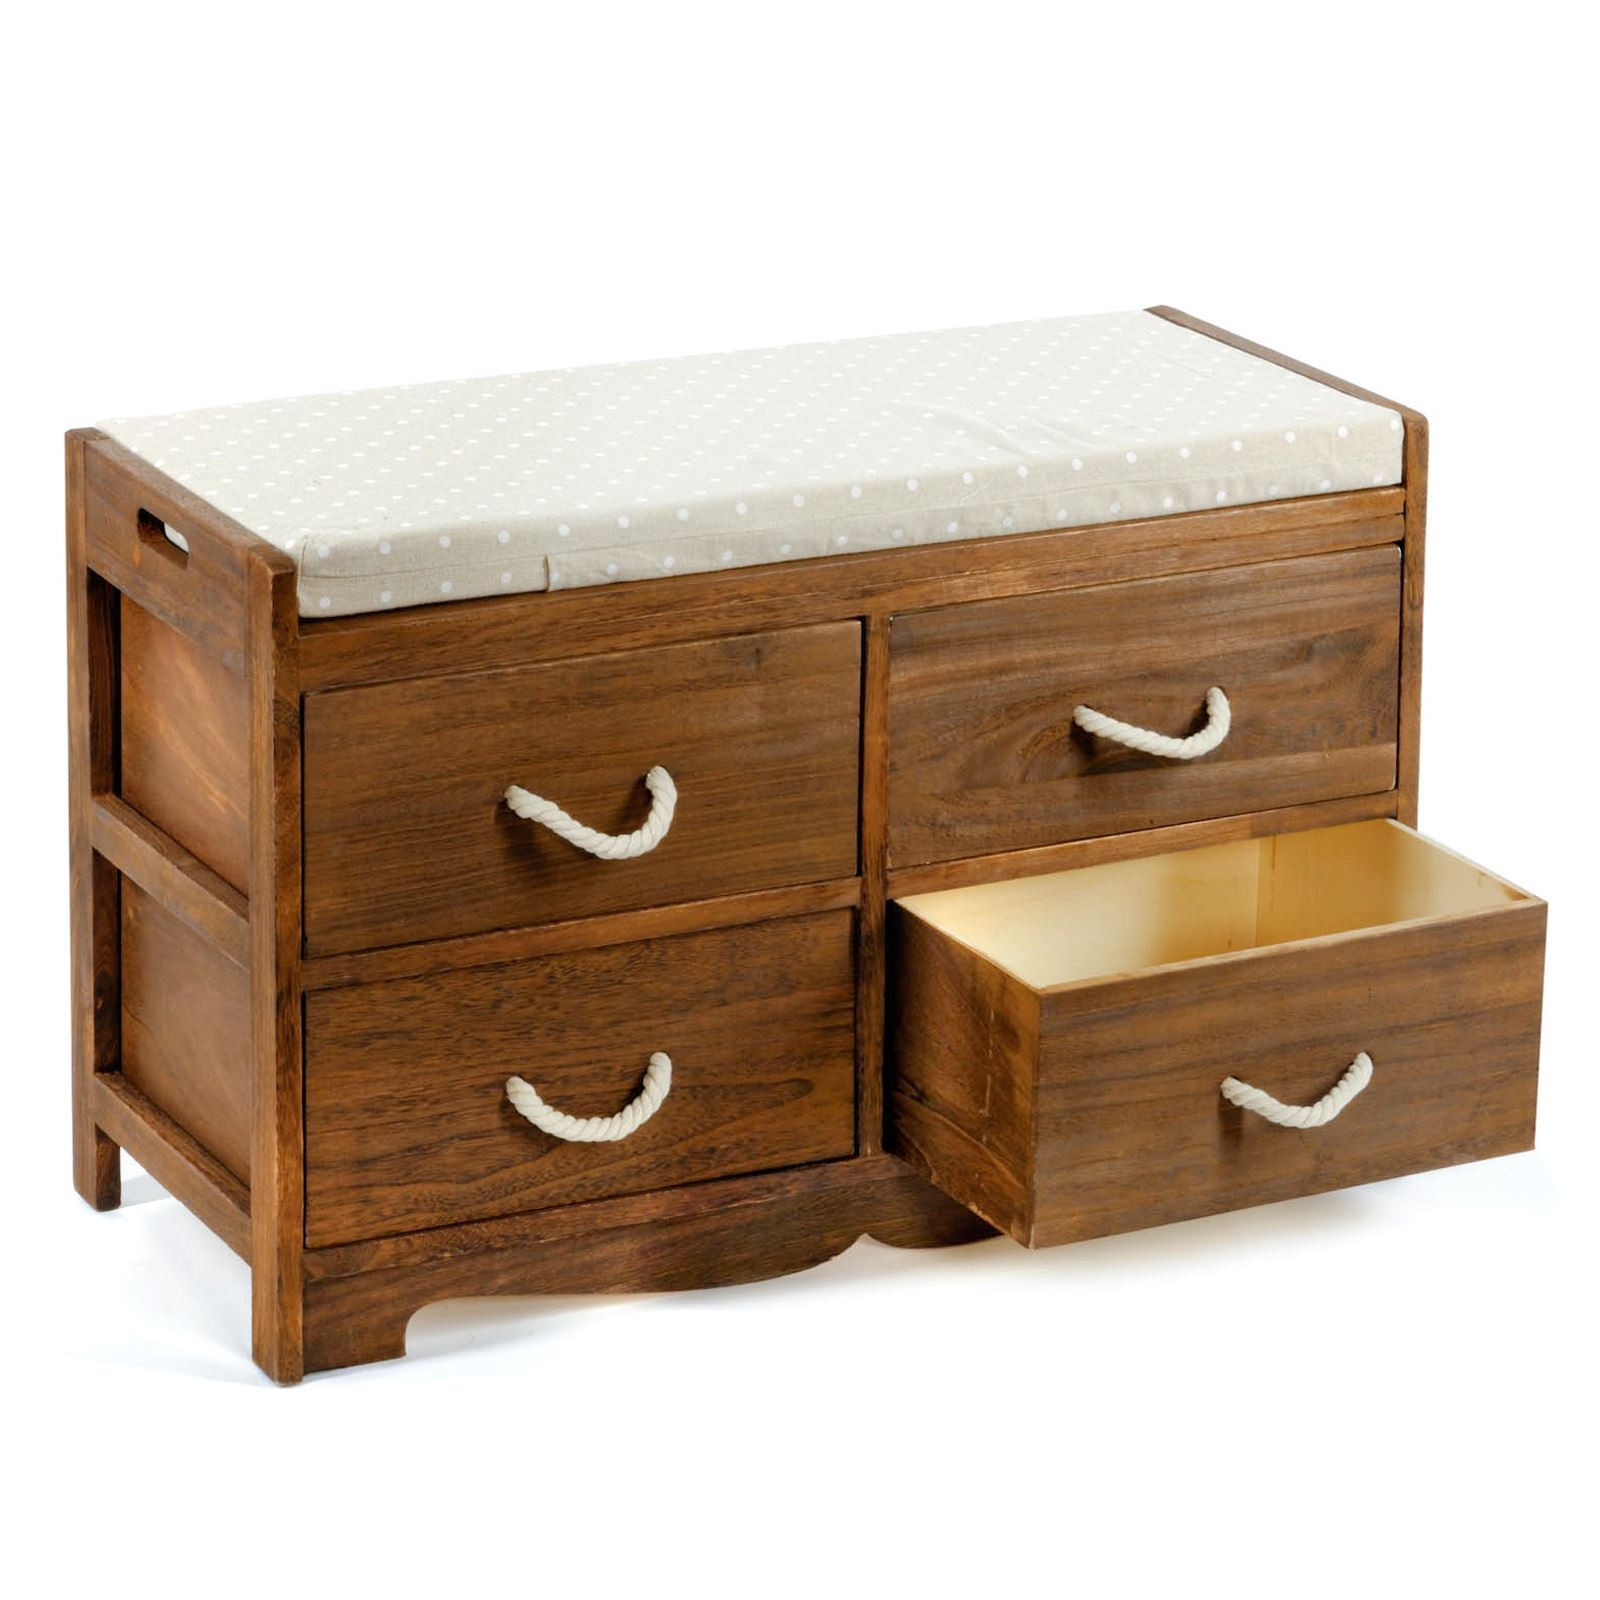 Wood Storage Bench With Drawers
 Wooden Storage Bench With Drawers